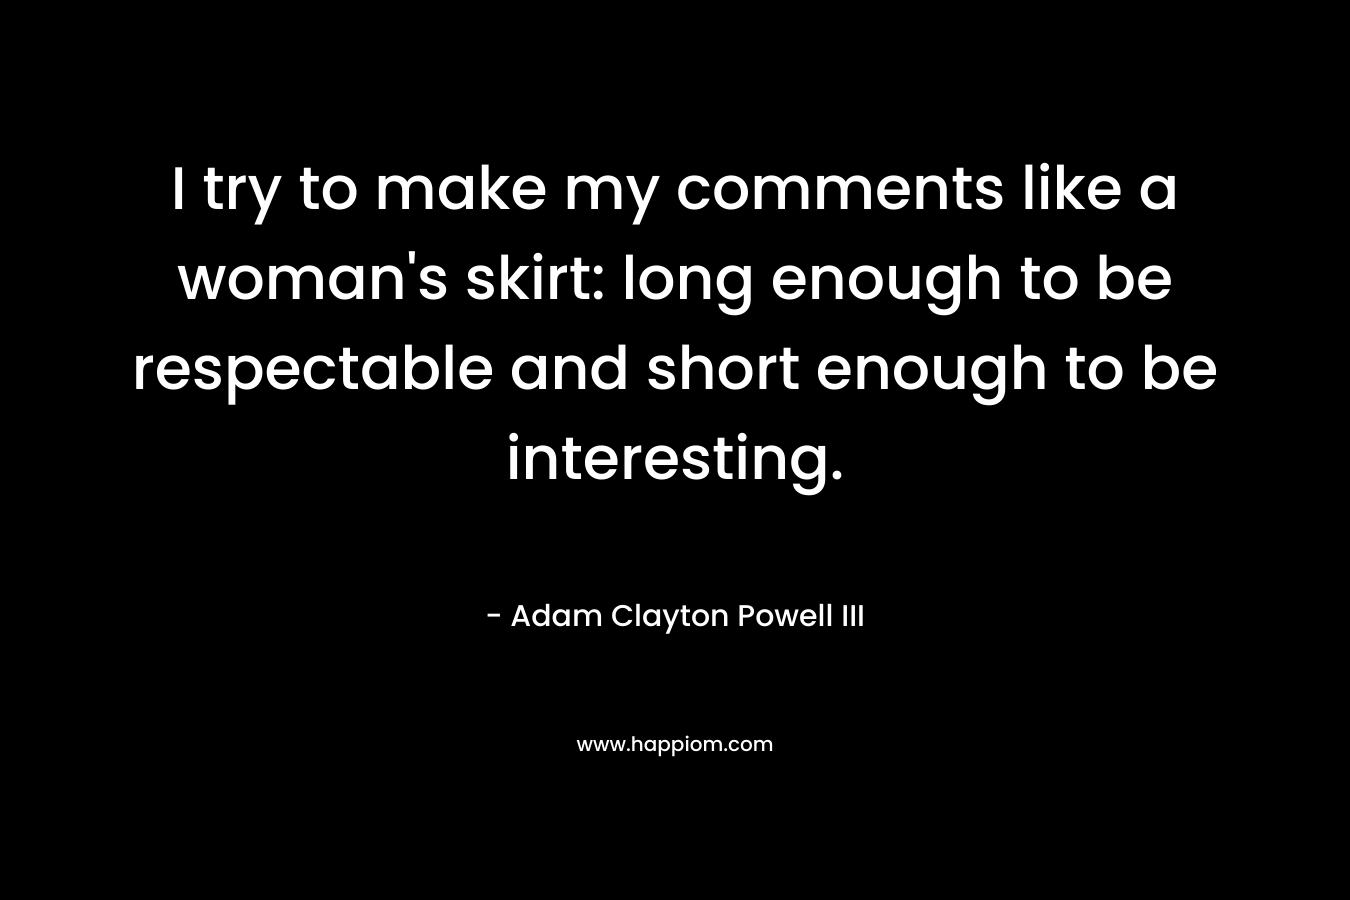 I try to make my comments like a woman’s skirt: long enough to be respectable and short enough to be interesting.  – Adam Clayton Powell III